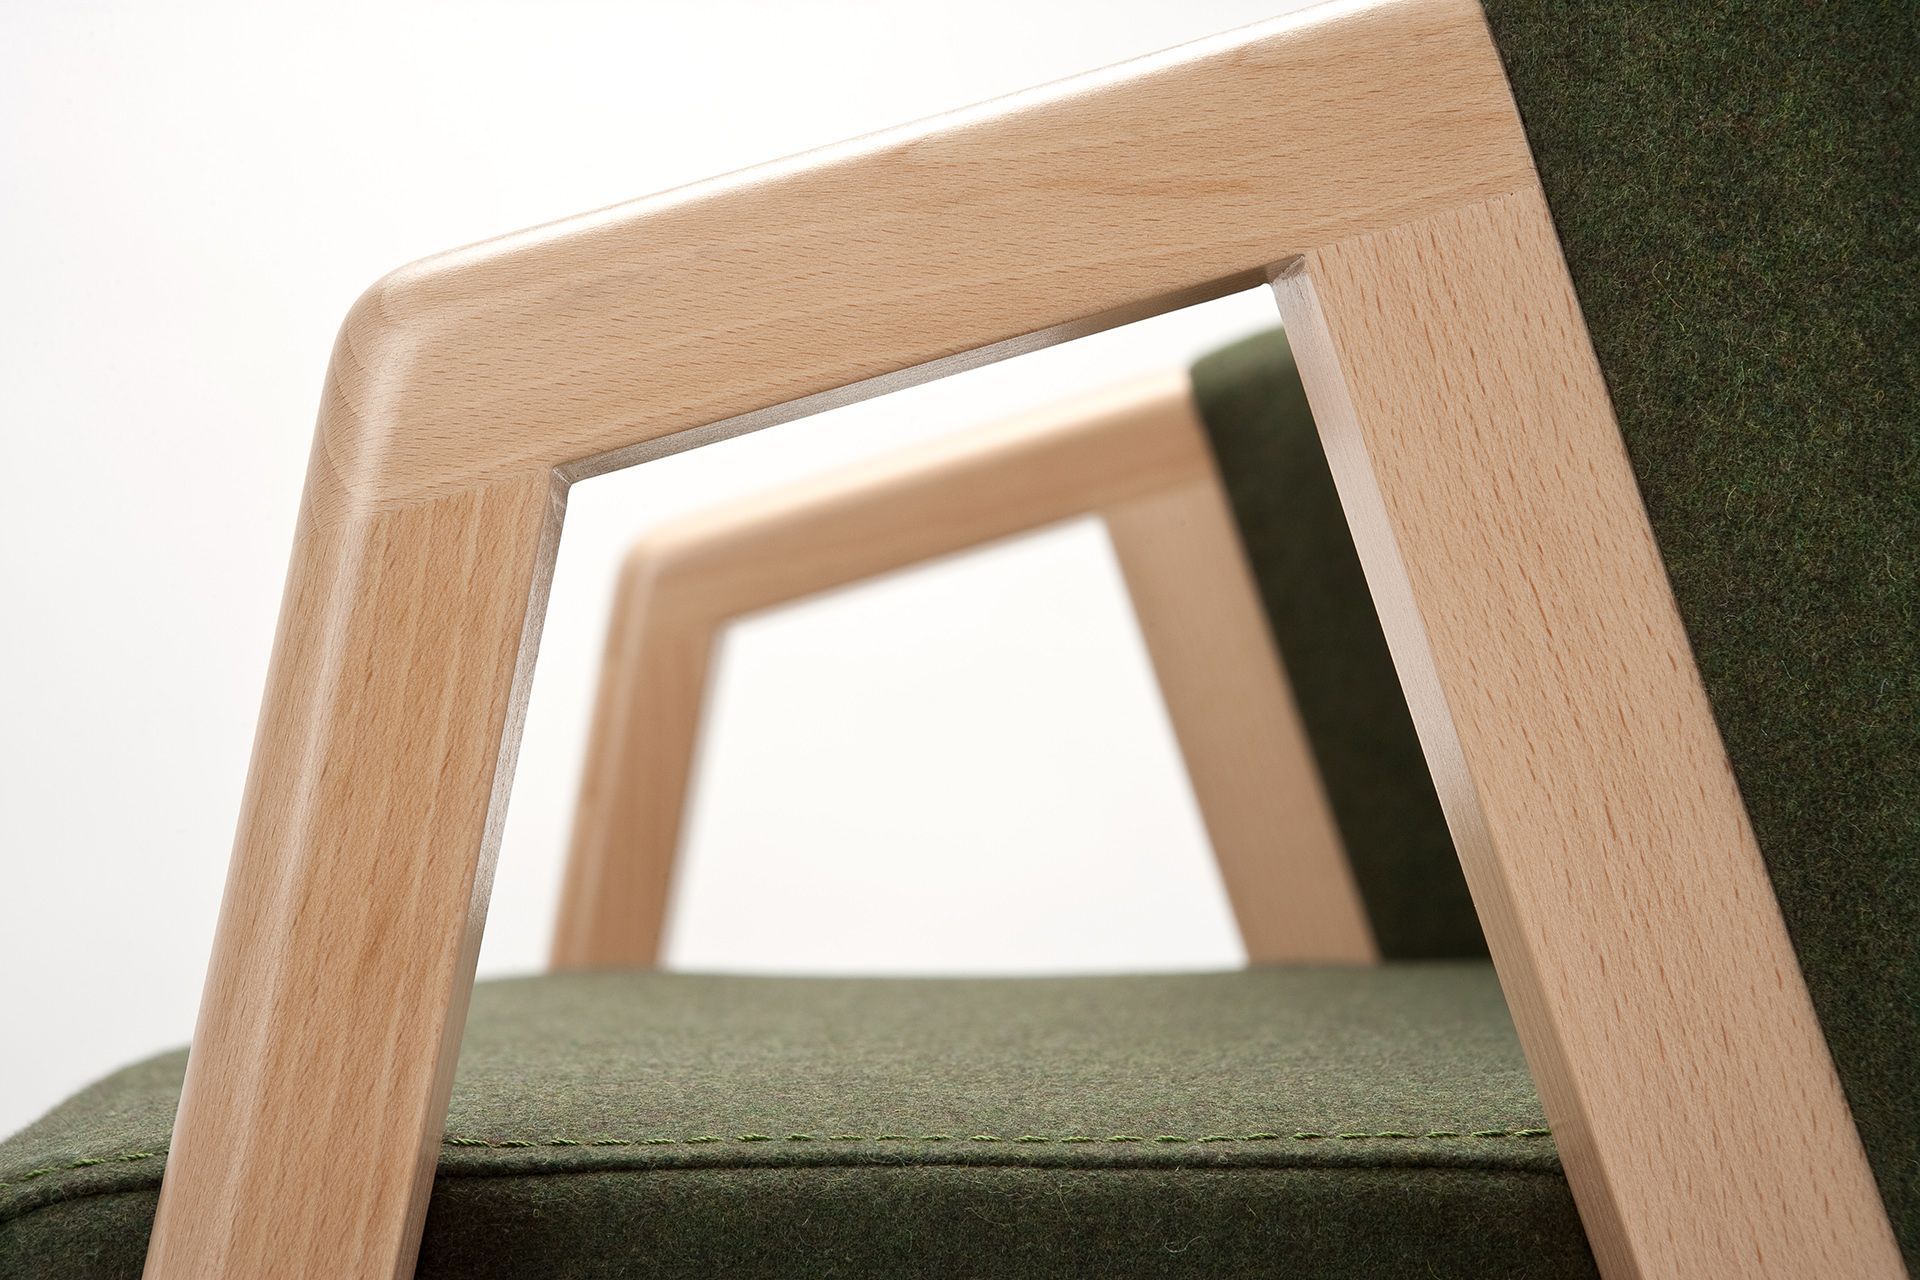 Chair B-Aires by Paged